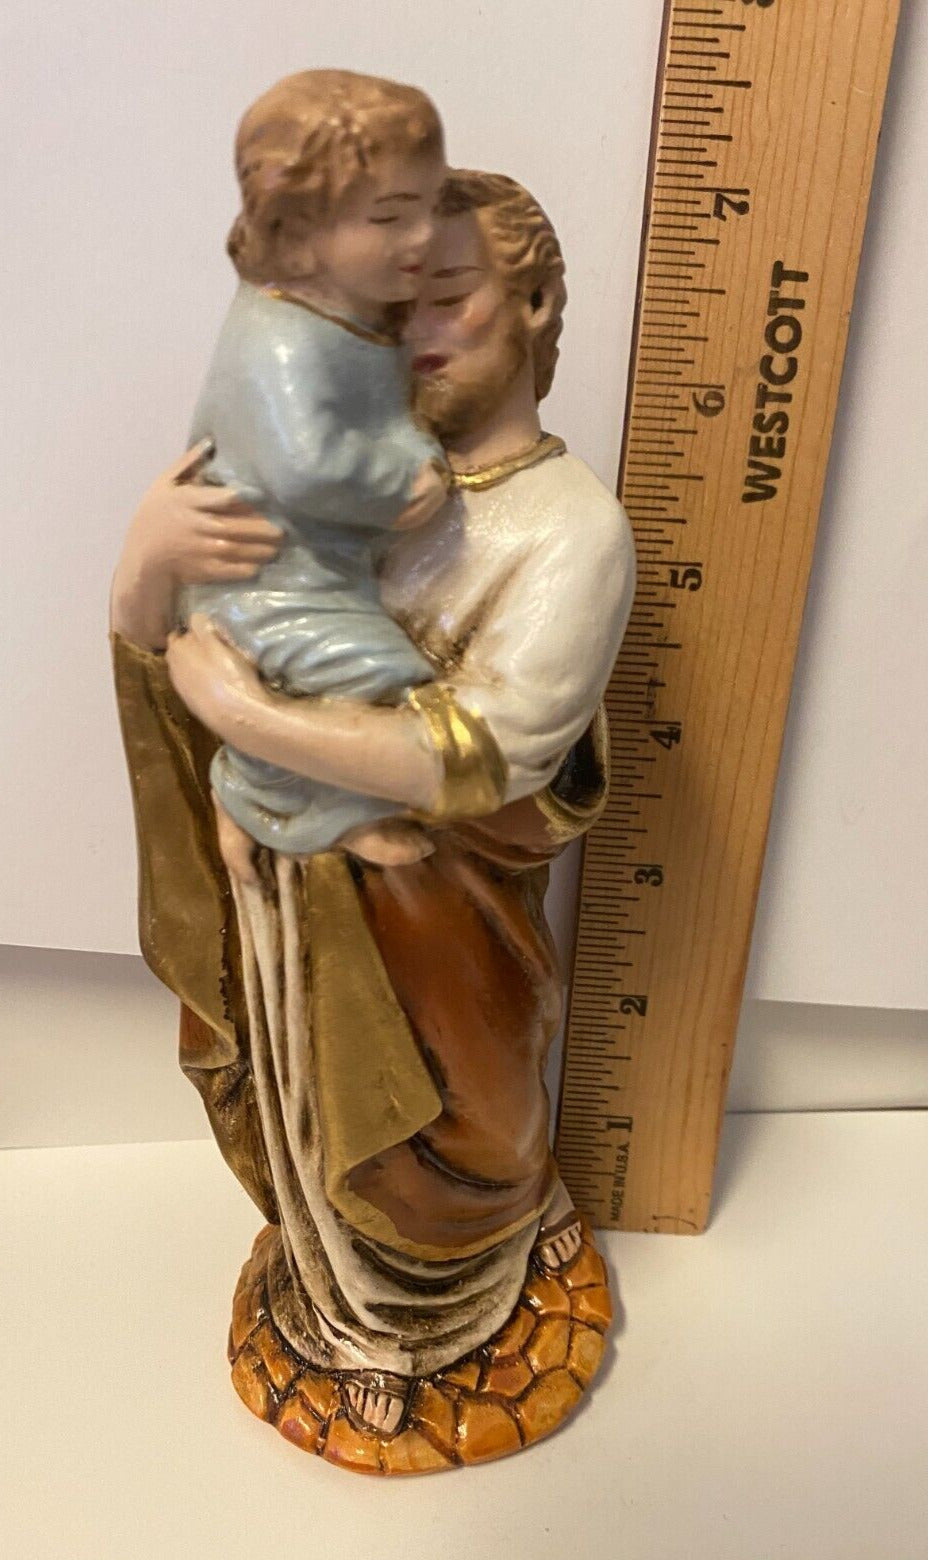 Saint Joseph with Child "A Father's Hug", 7.25" Statue, New from Colombia - Bob and Penny Lord